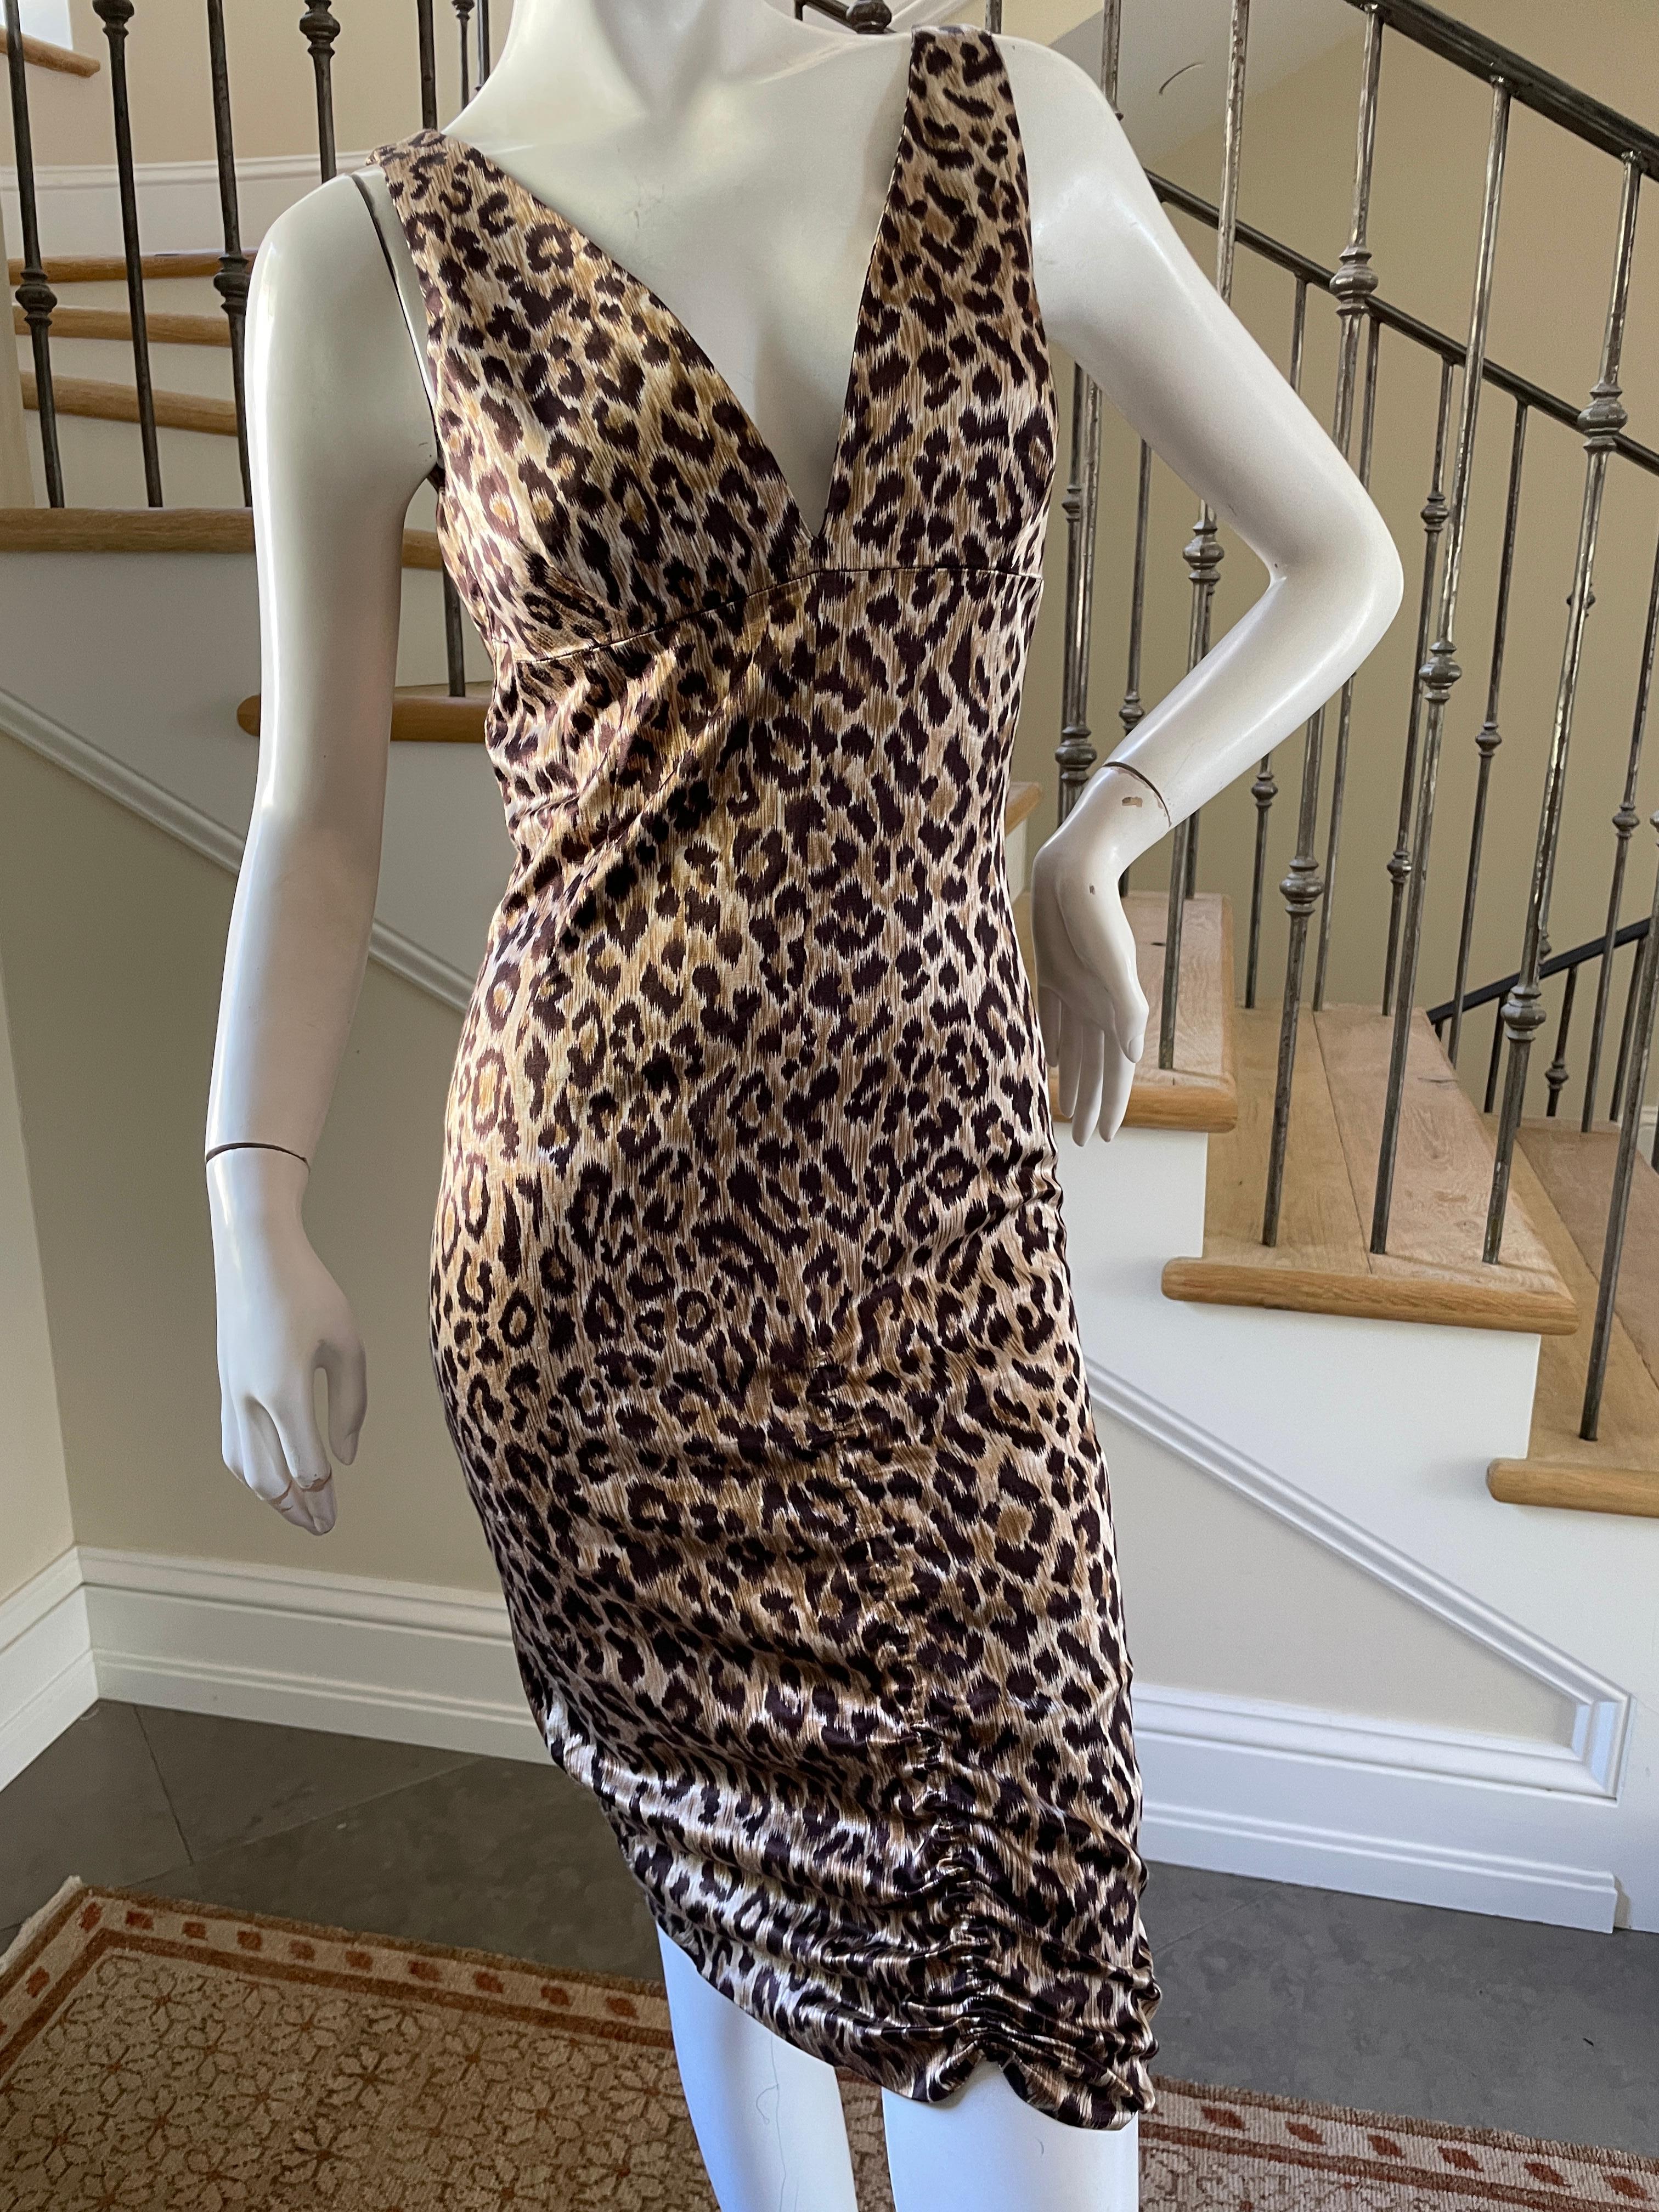 Dolce & Gabbana for D&G Sheer Silk Leopard Print Cocktail Dress .
 This is so wonderful, so sexy. the photos don't do it justice.
Size 40
  Bust 37